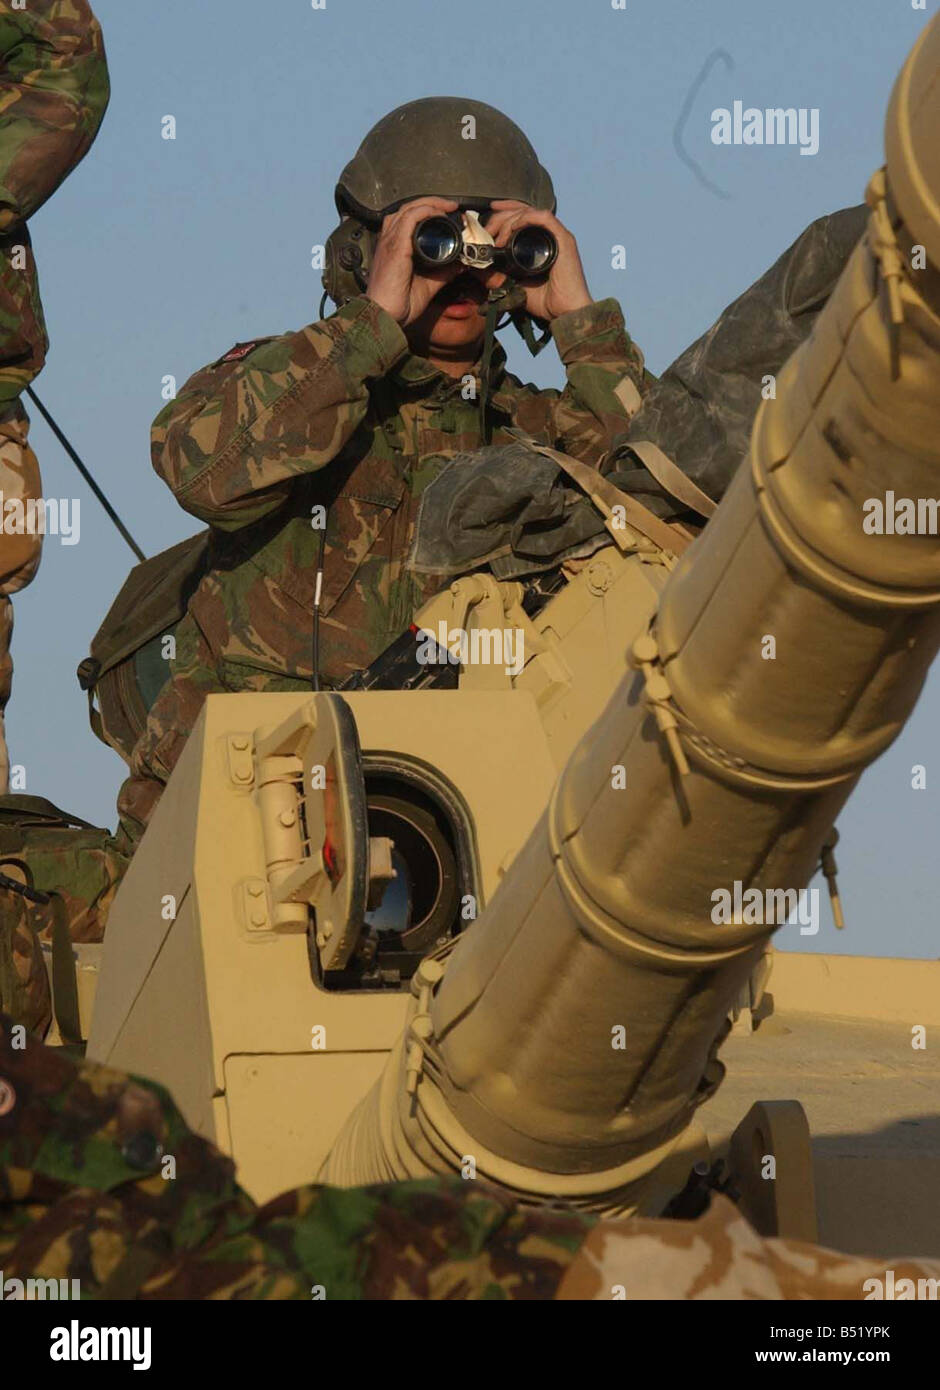 THE ROYAL SCOTS DRAGOON GUARDS OF B SQUADRON March 2003 AT THE PRACTICE  RANGE IN KUWAIT TANK COMMANDER LOOKING THROUGH BINOCULARS IRAQ WAR 2003  Stock Photo - Alamy